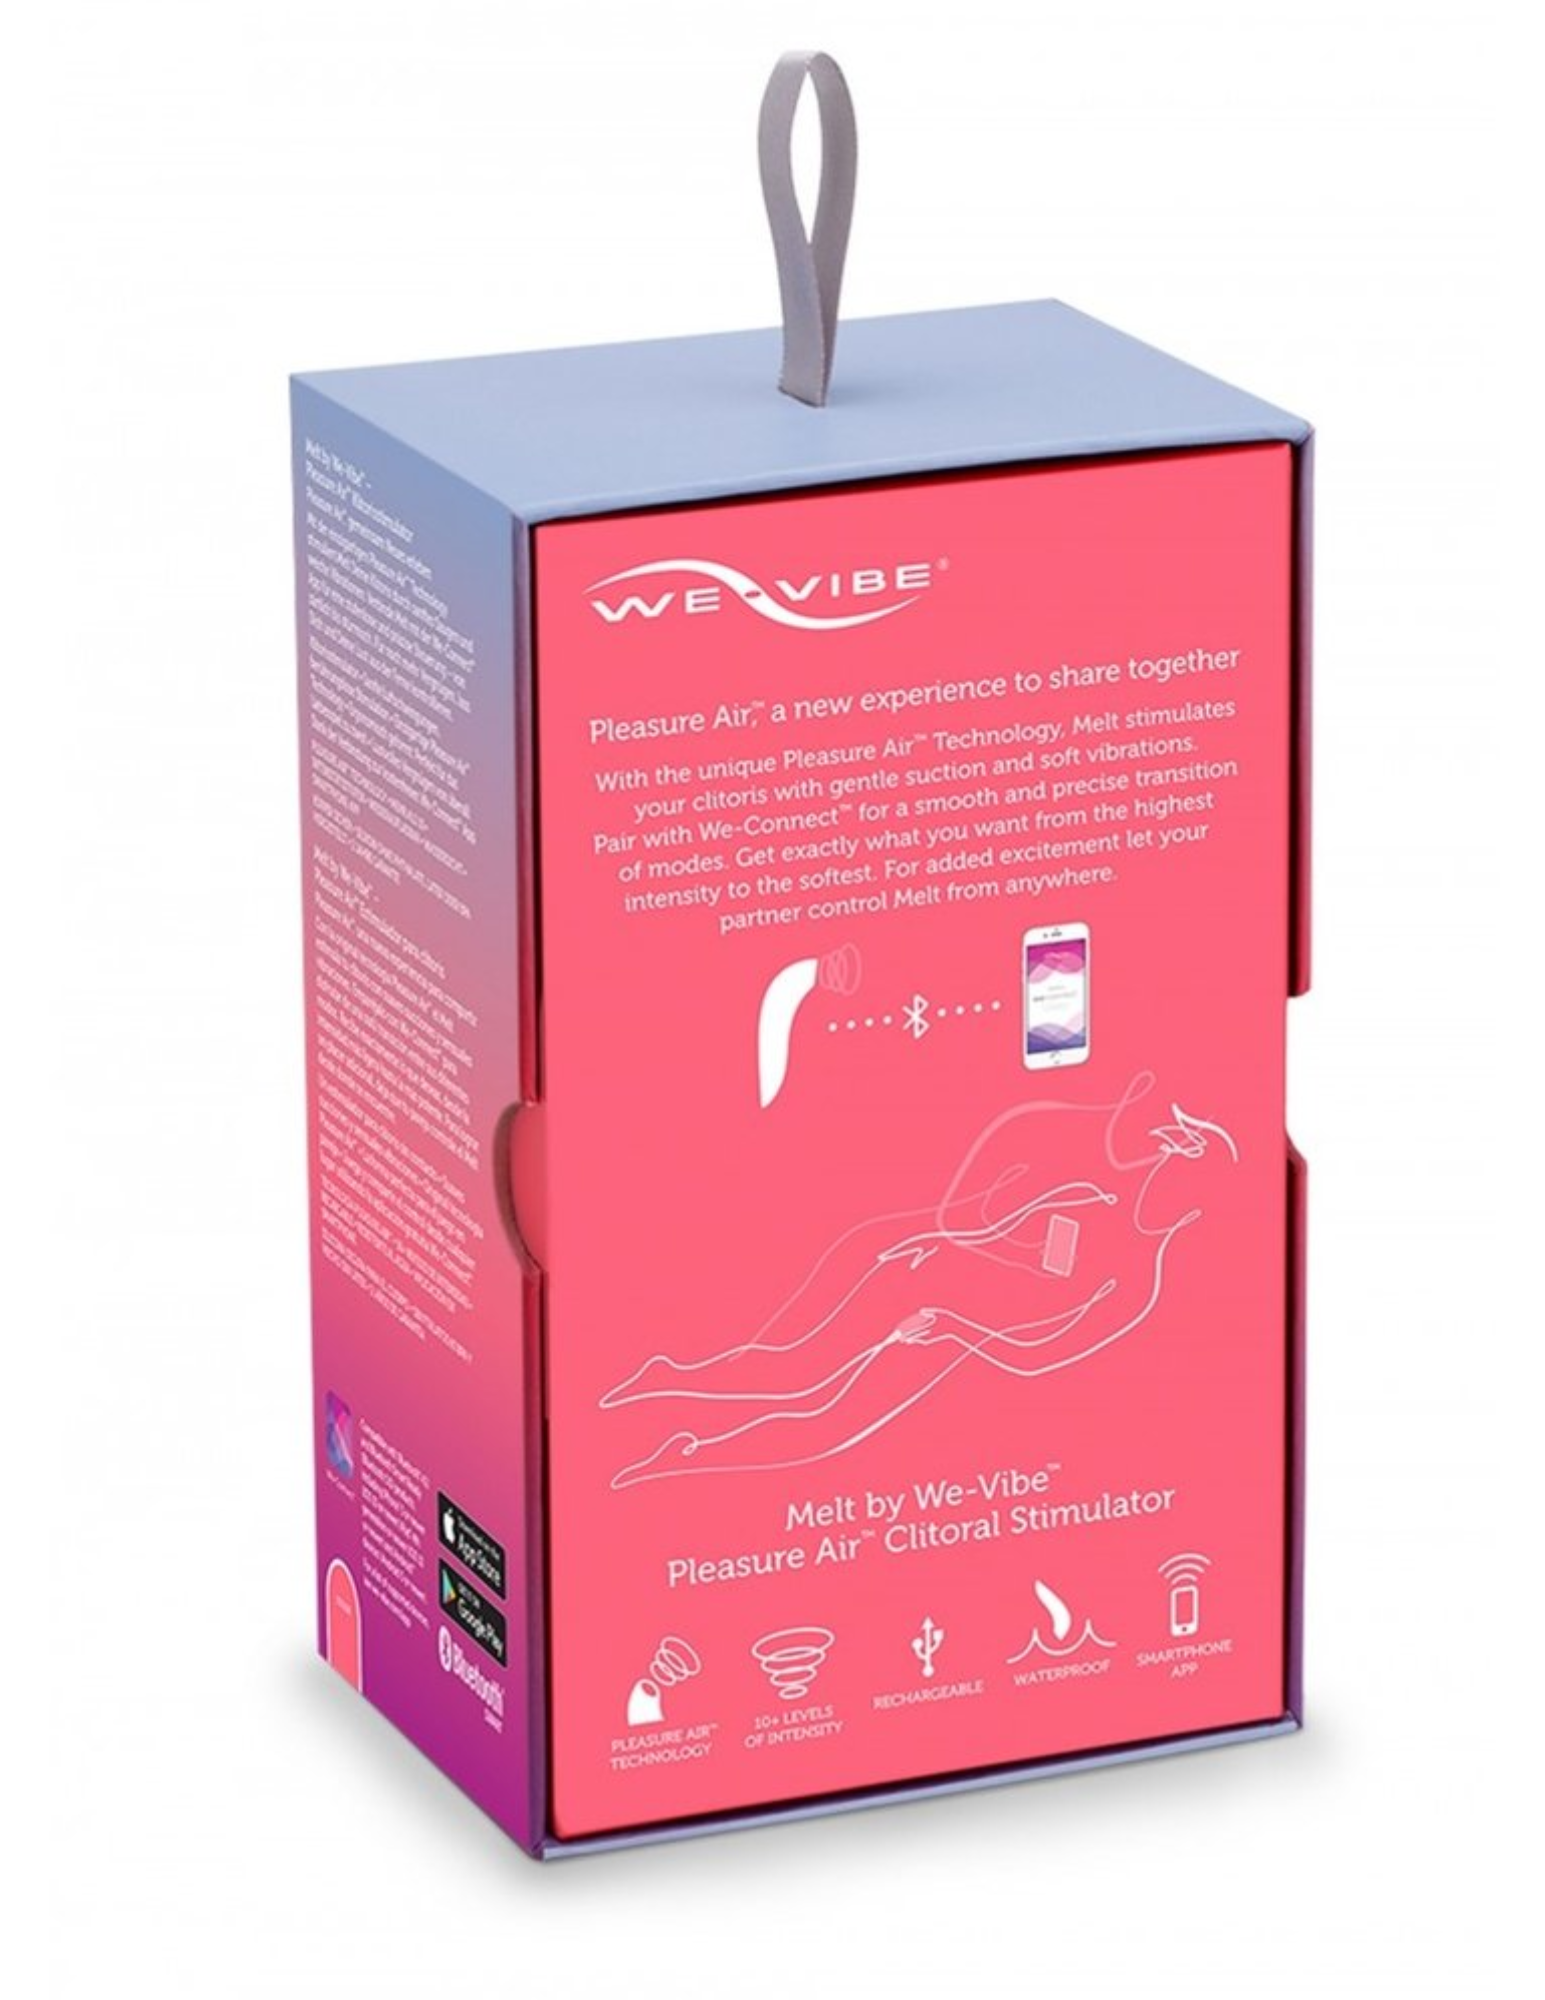 Photo of the back of the box for the We-Vibe Melt (coral).